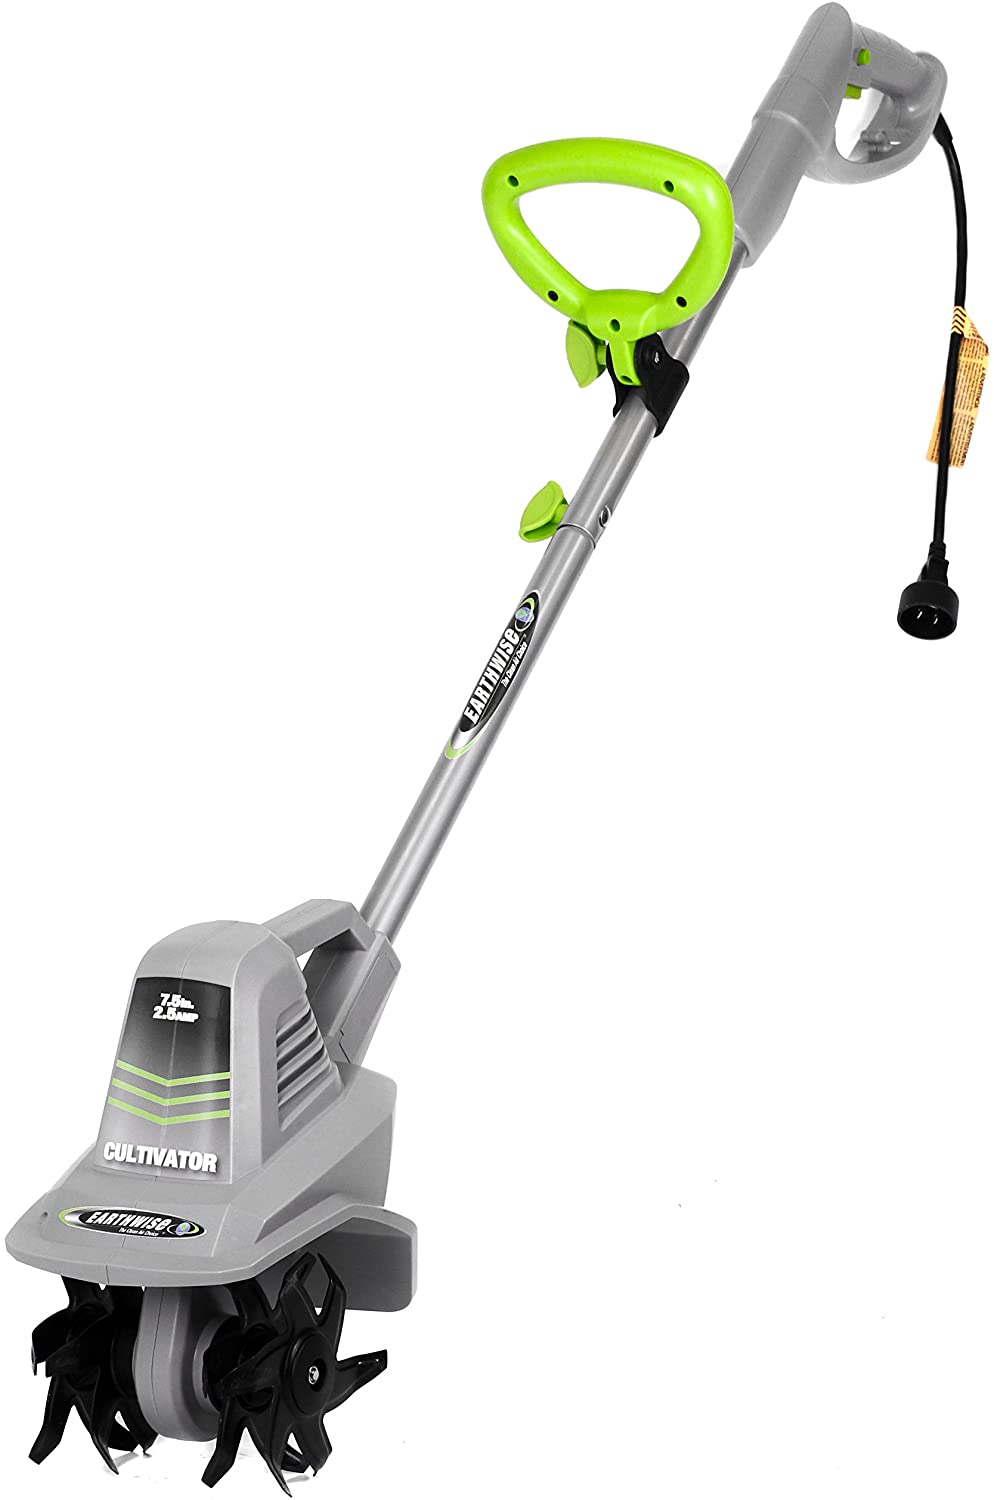 Earthwise TC70025 Corded Electric Tiller